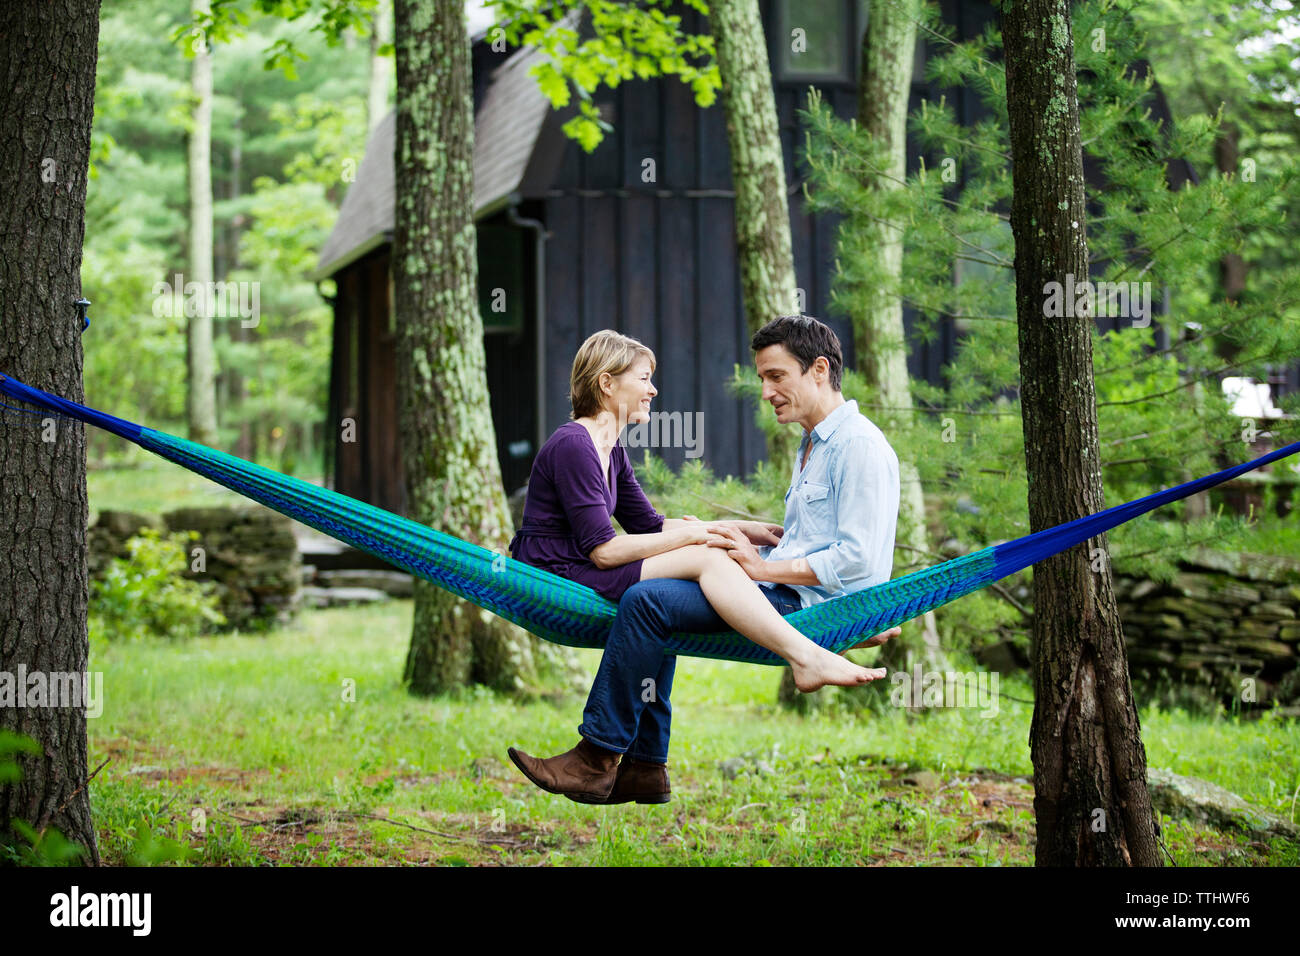 Couple sitting on hammock Banque D'Images